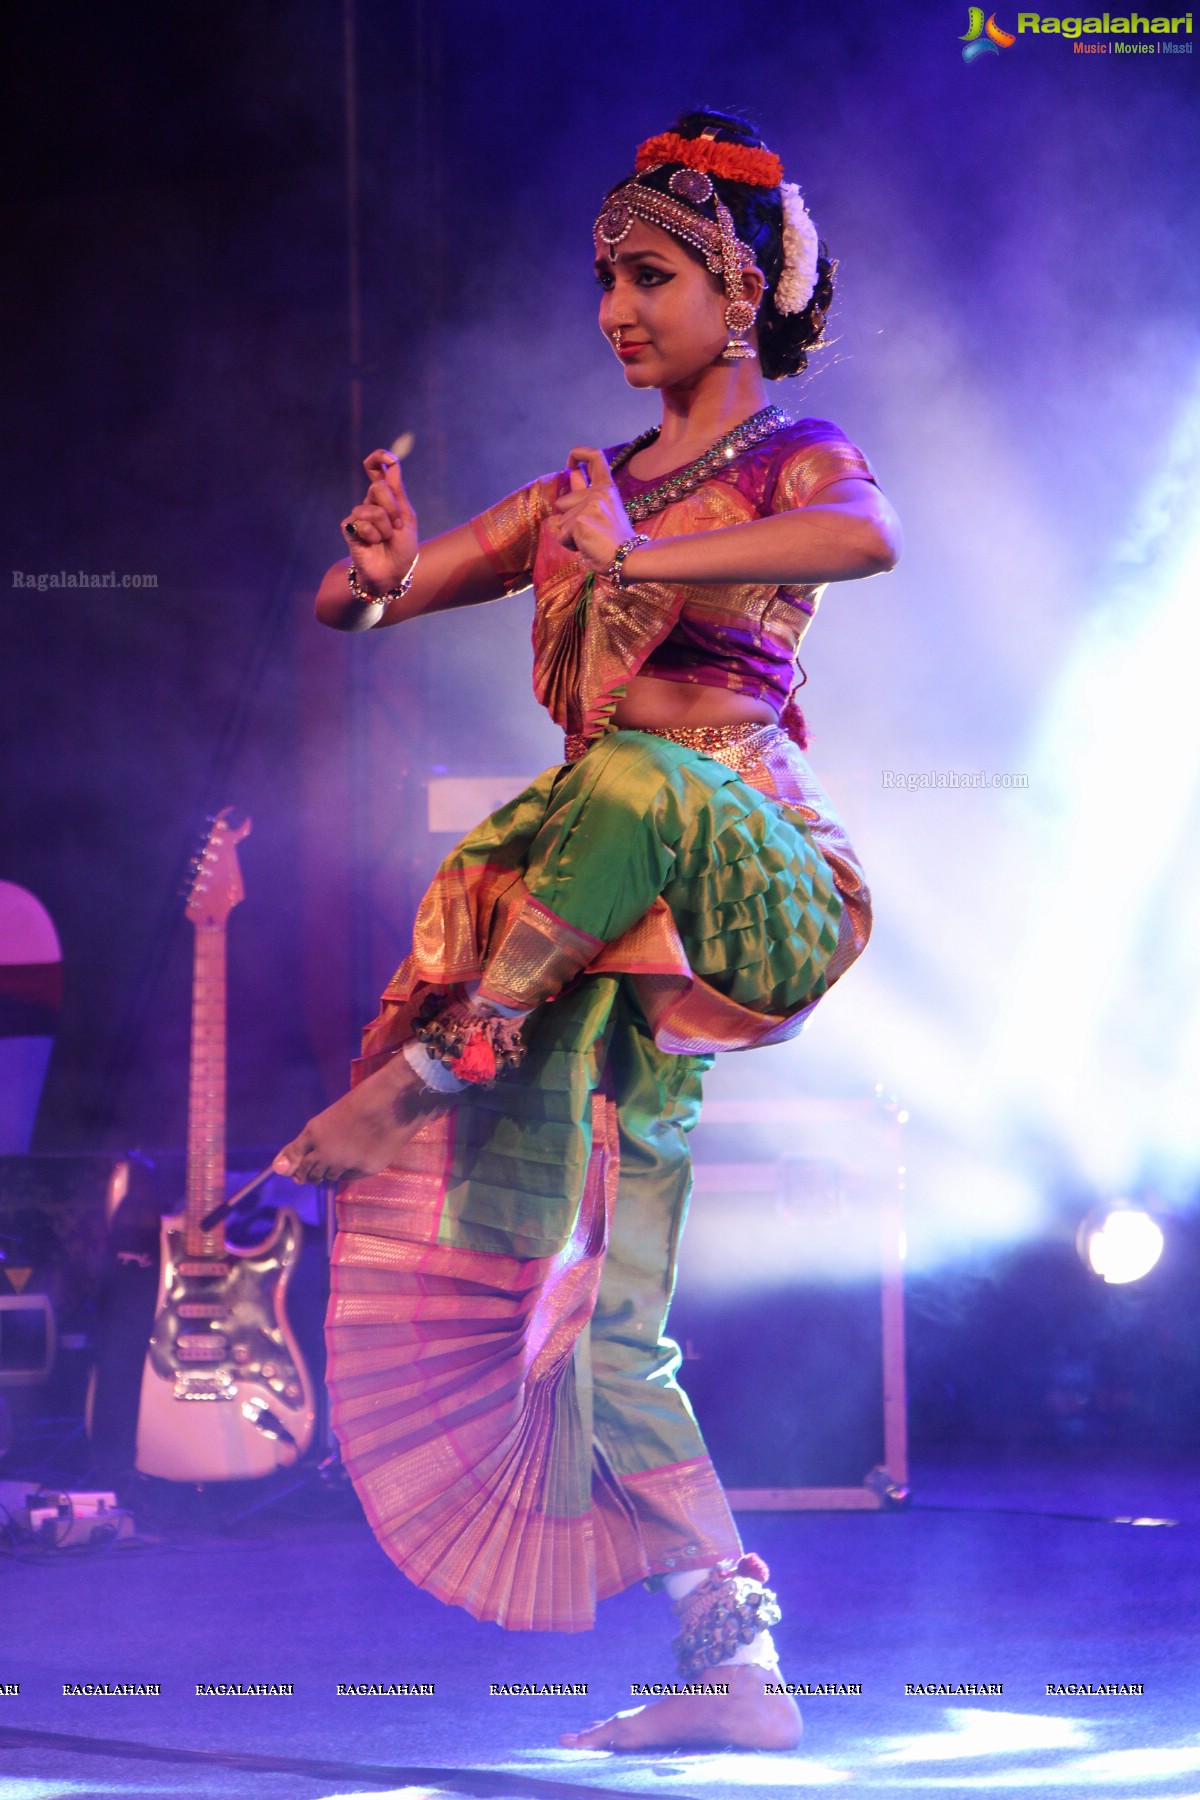 Bhavana Reddy Faces Performance at Cyber City Conventions